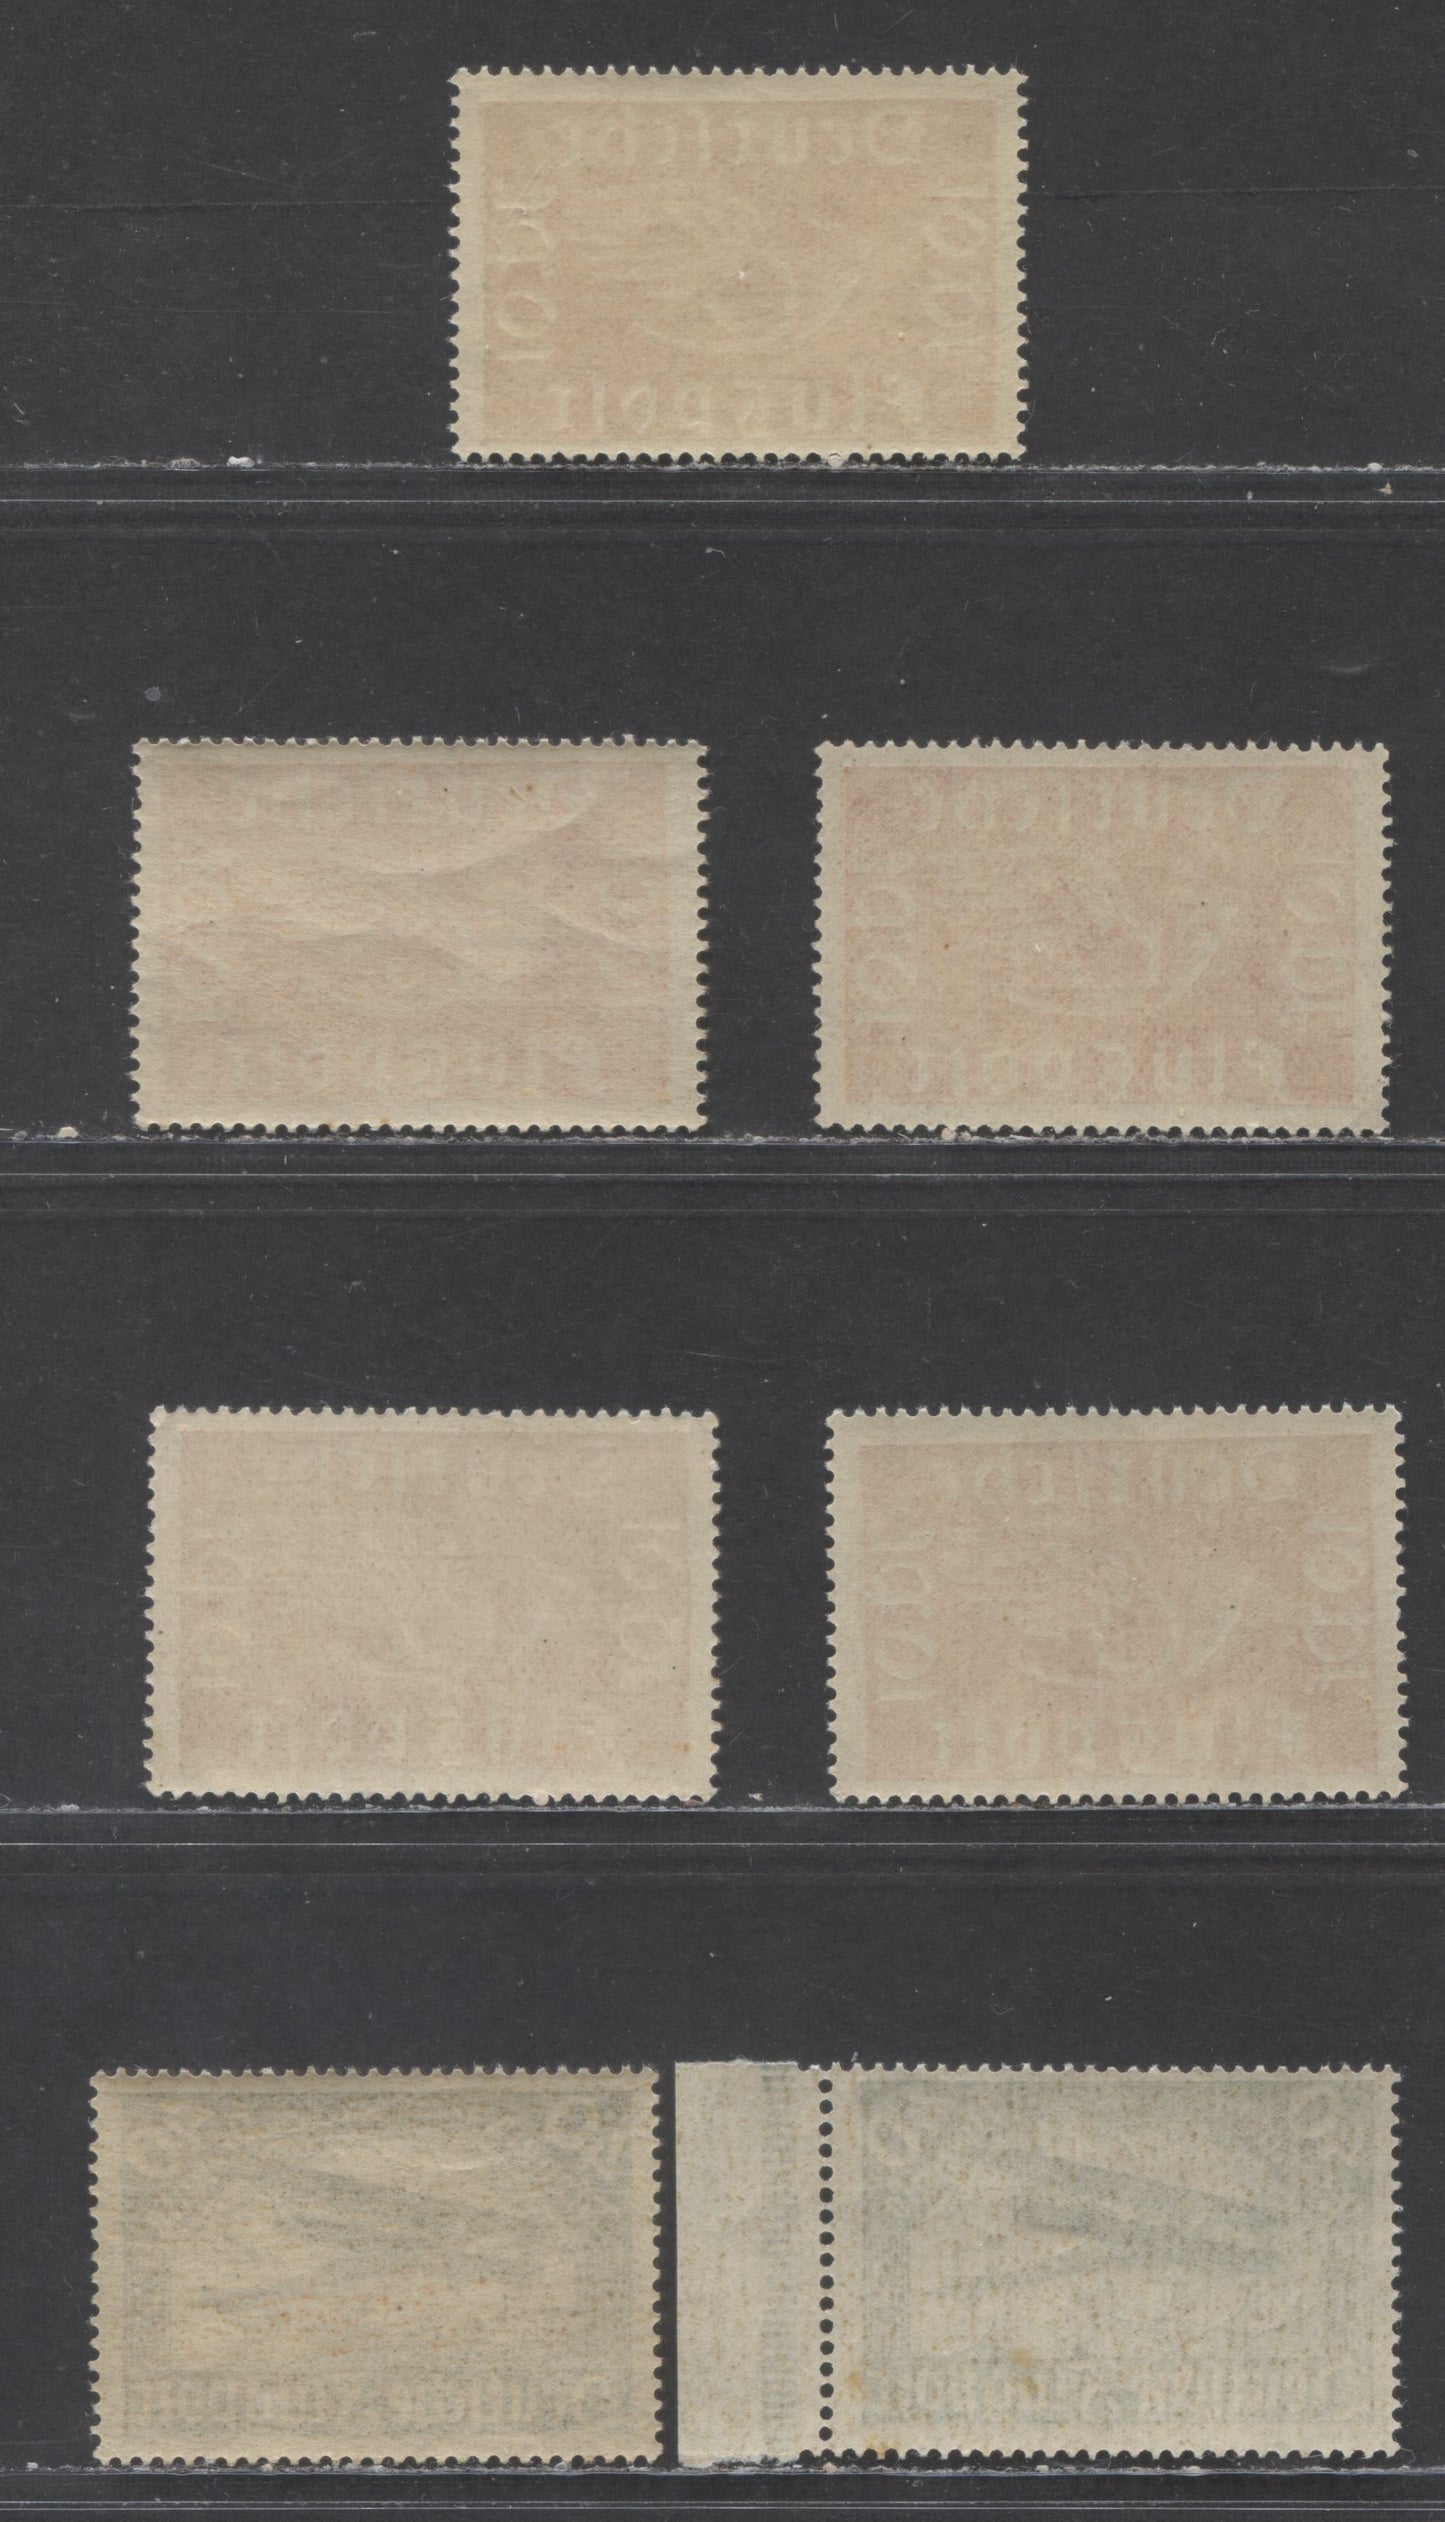 Lot 92 Germany SC#C1-C2(MI#111a,112a) 1919 Airmail Issue, Group Of Different Variations Of The Basic Shades On Both Horizontal And Vertical Wove Papers, 7 F/VF Singles, Click on Listing to See ALL Pictures, Estimated Value $5 USD